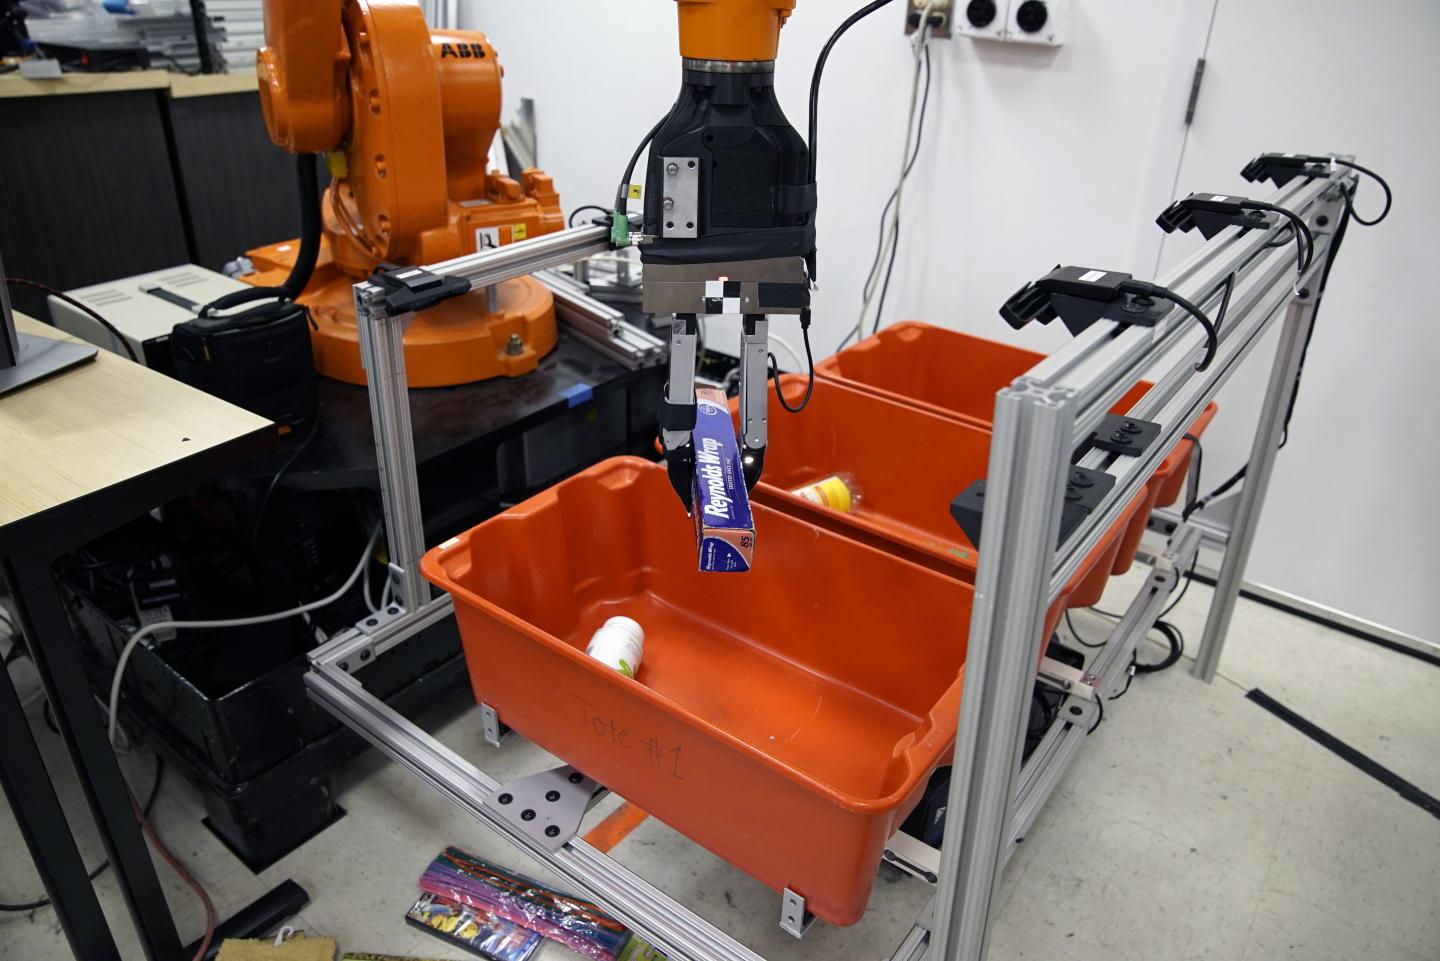 The 'pick-and-place' system consists of a standard industrial robotic arm that the researchers outfitted with a custom gripper and suction cup. Source: Melanie Gonick/MIT